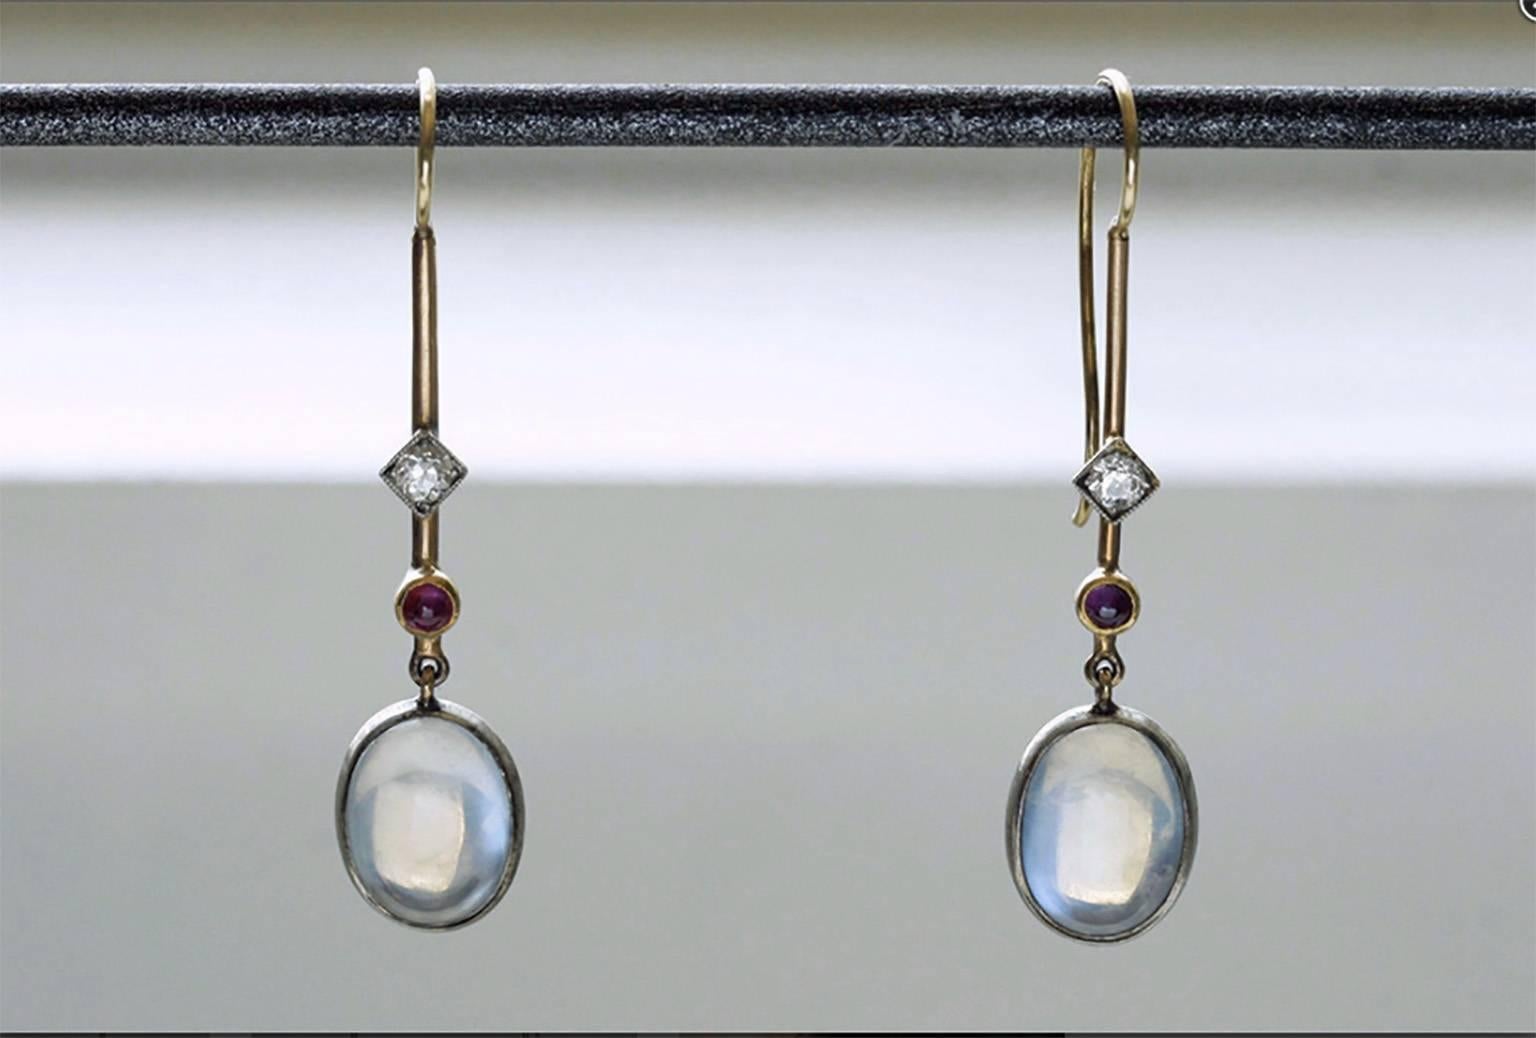 Edwardian 'Skate-Blade' long drop moonstone earrings with platinum-set small European cut diamond and ruby cabochon. The earrings are 14k gold, and the foil-backed moonstones reflect the light beautifully.  

Total Drop: Approximately 1.75”